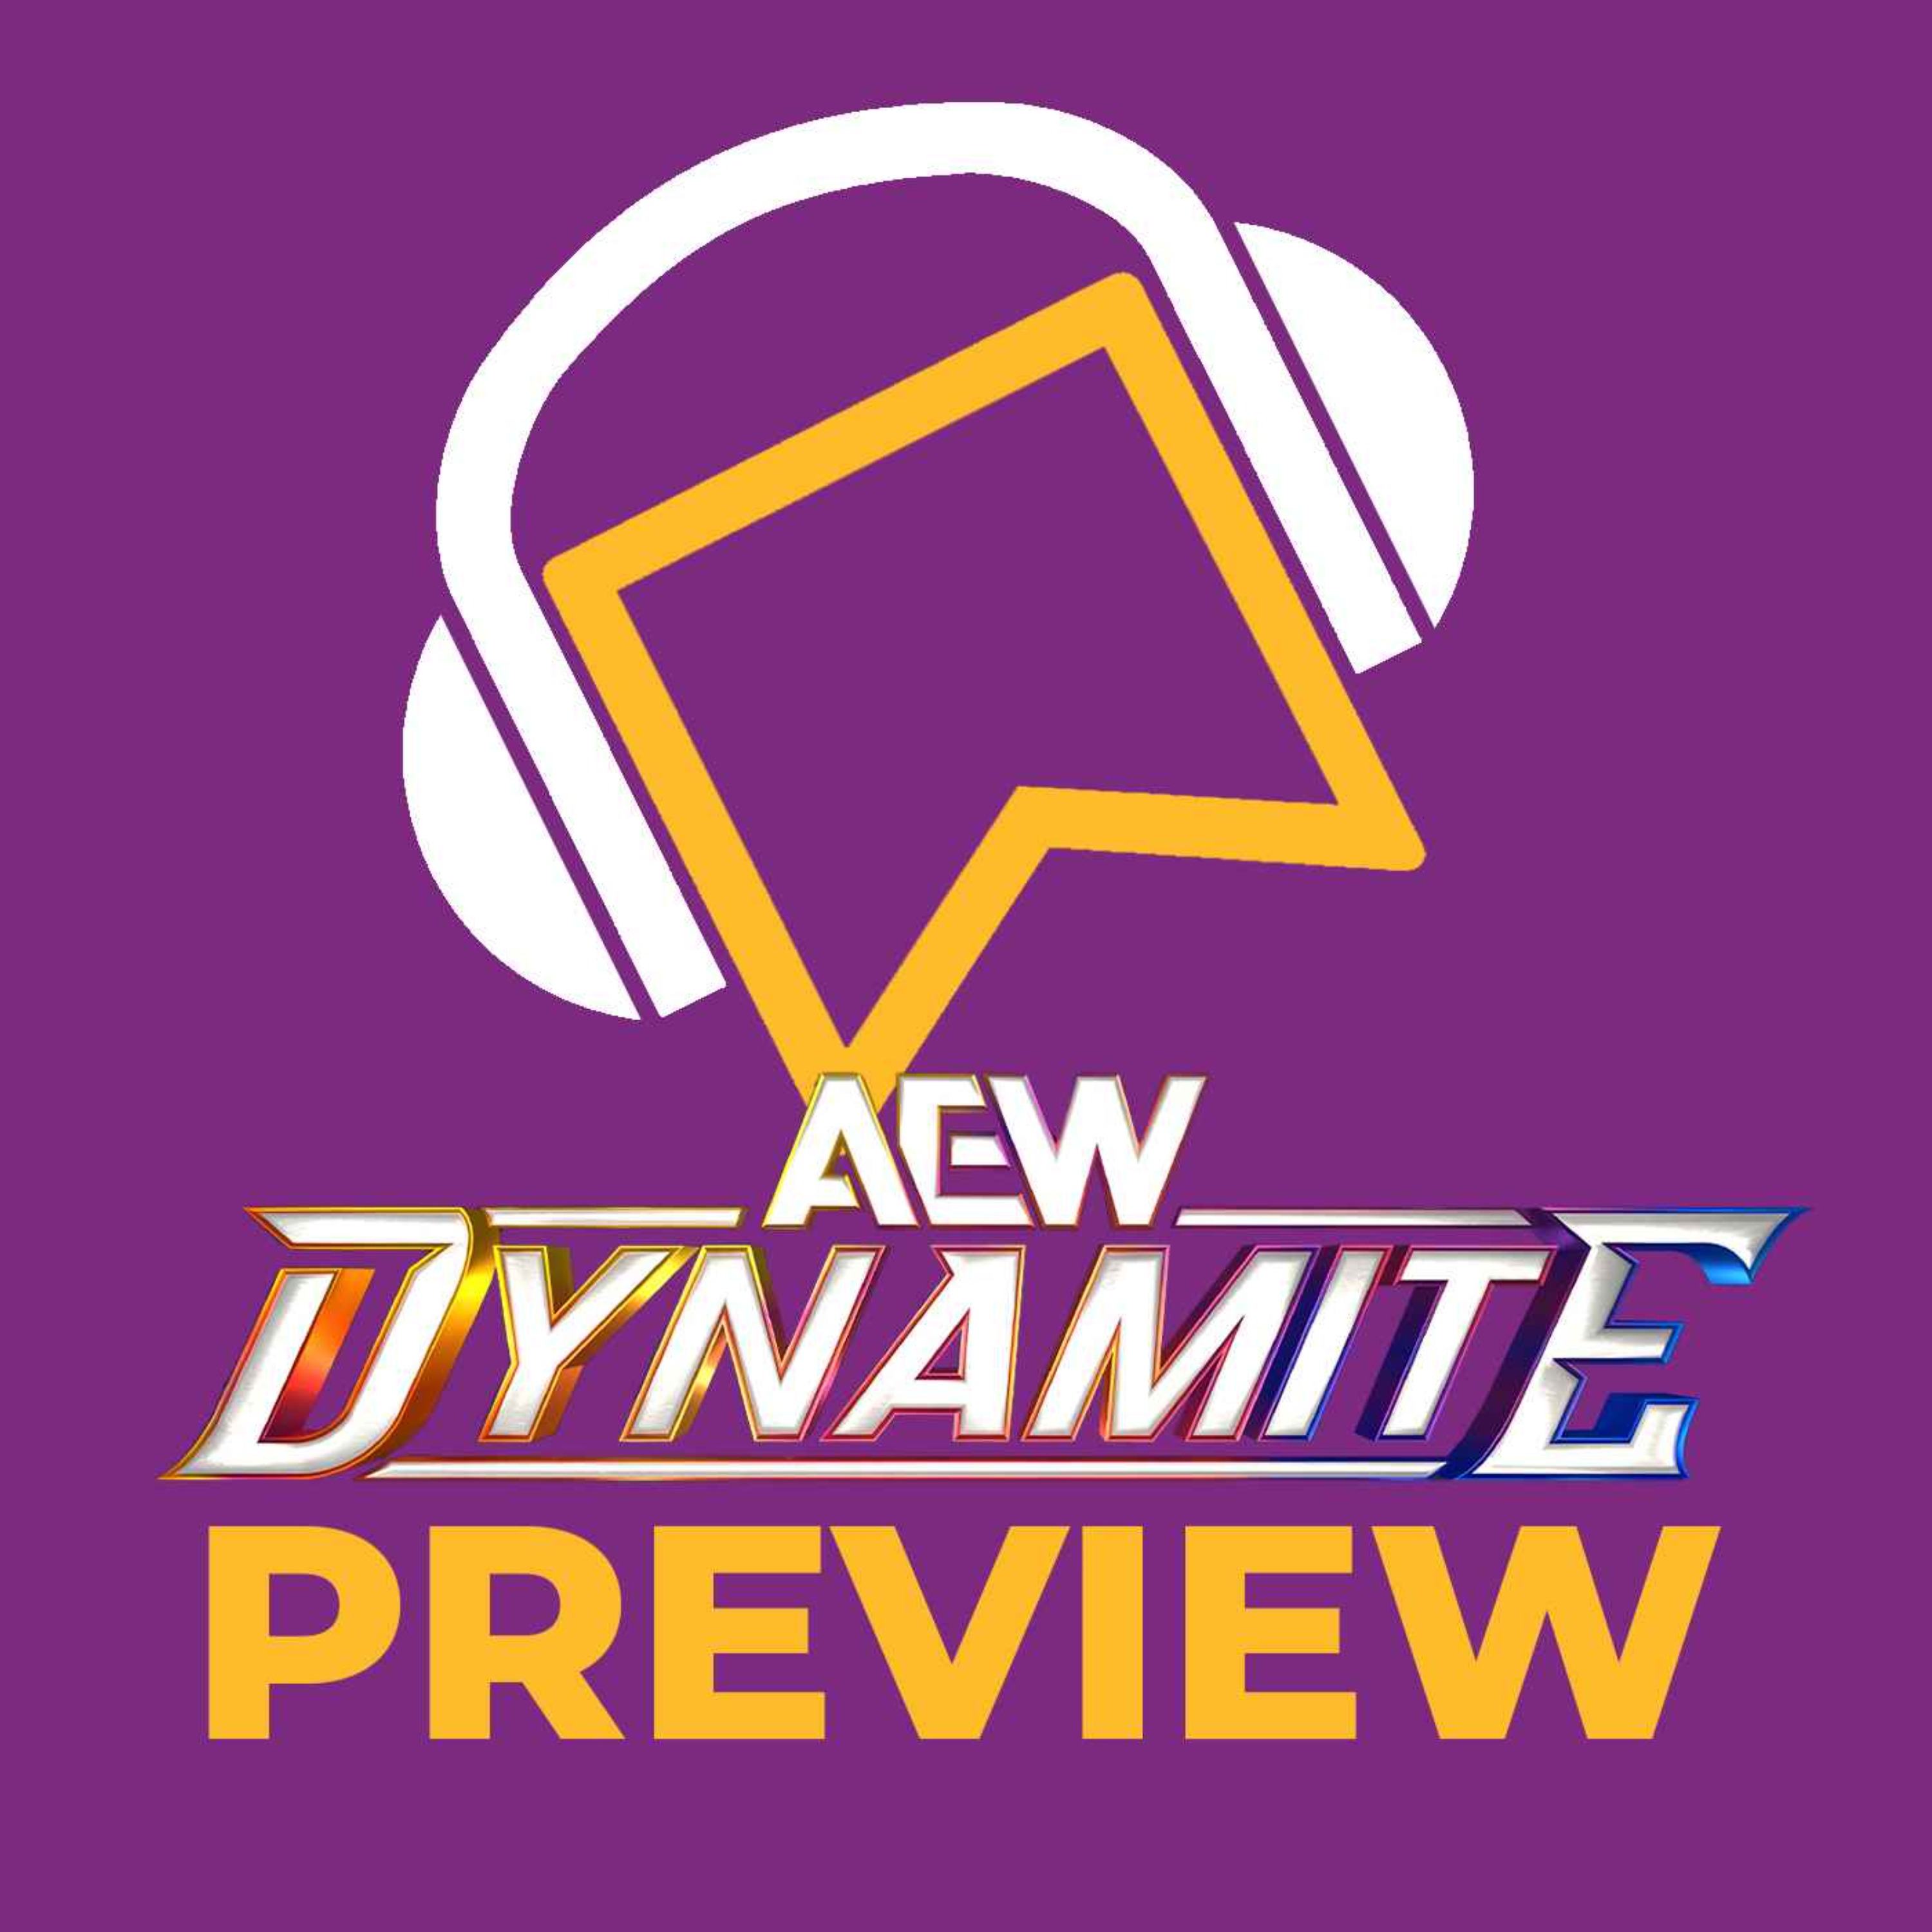 AEW Dynamite Preview - AEW Dynasty Go-Home Show! Jon Moxley RETURNS! Claudio Castagnoli Vs. Will Ospreay! How Does AEW Recover From Last Week?!